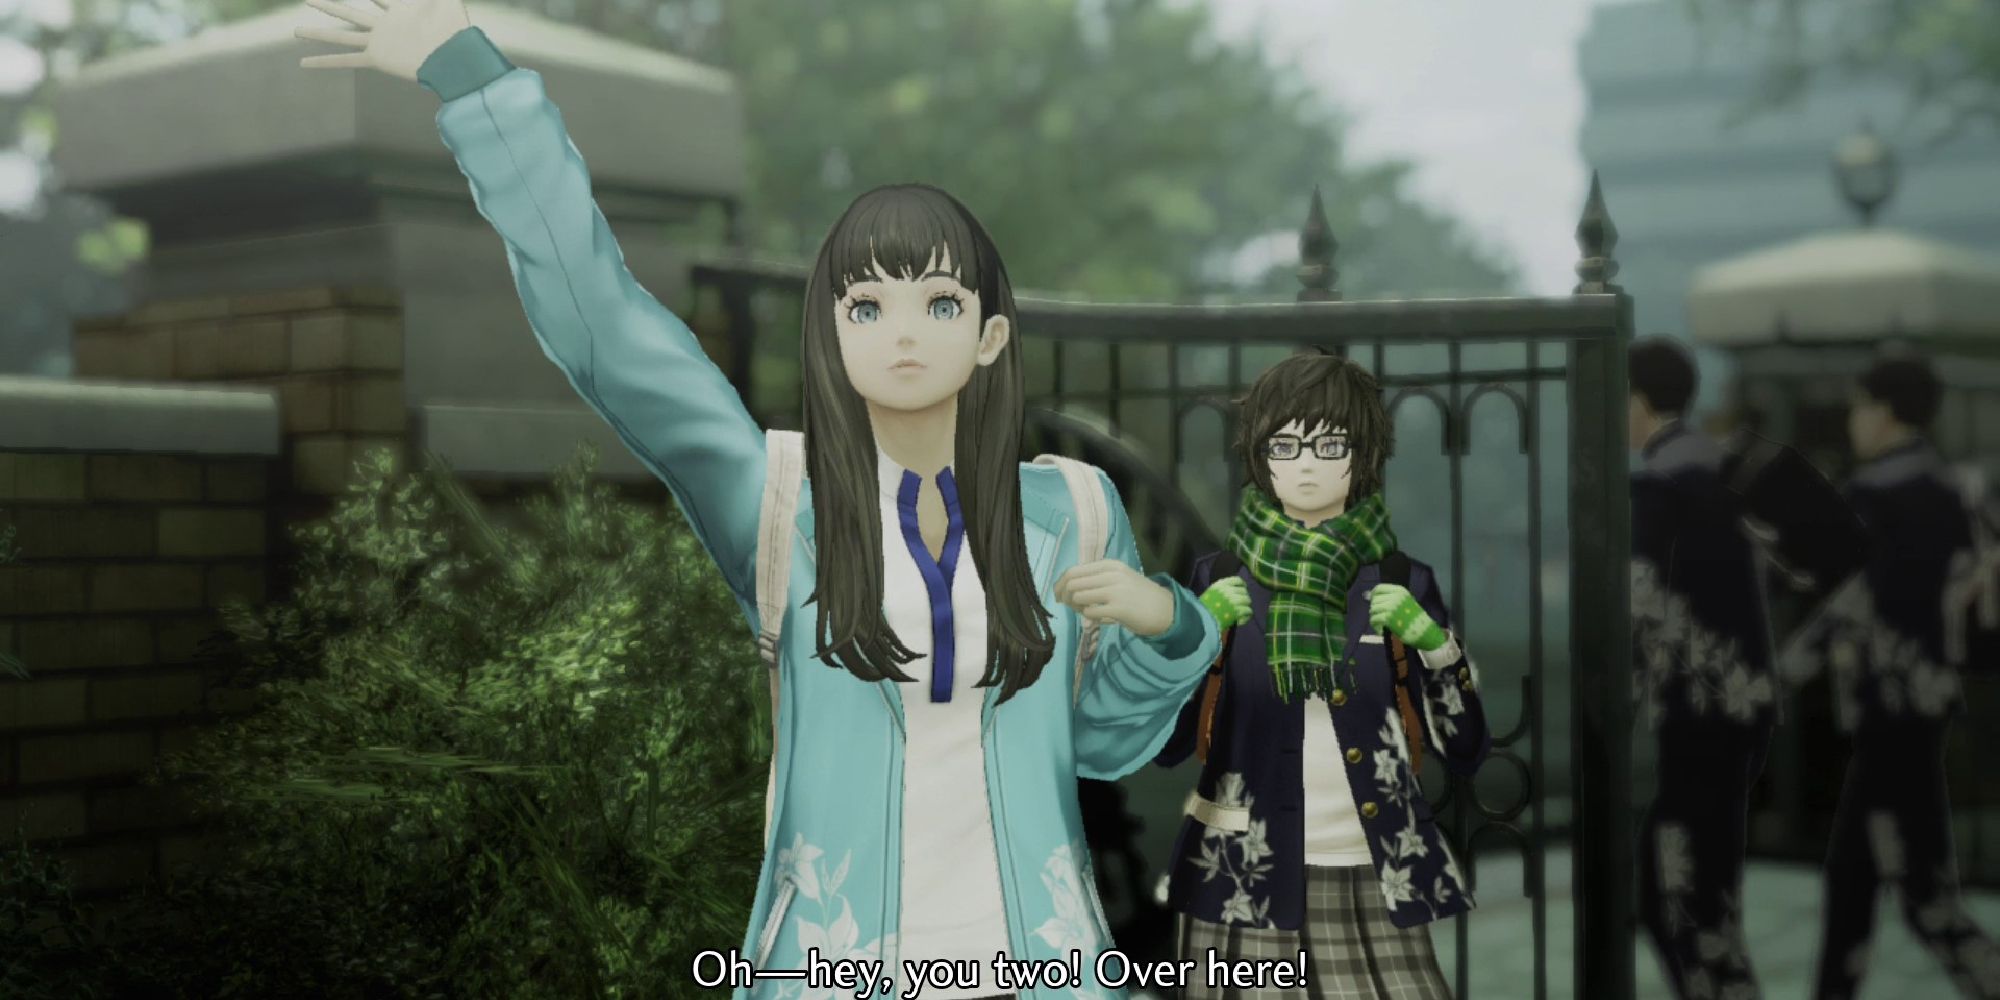 Tao Isonokami waves to the protagonist before Tokyo is destroyed in Shin Megami Tensei 5